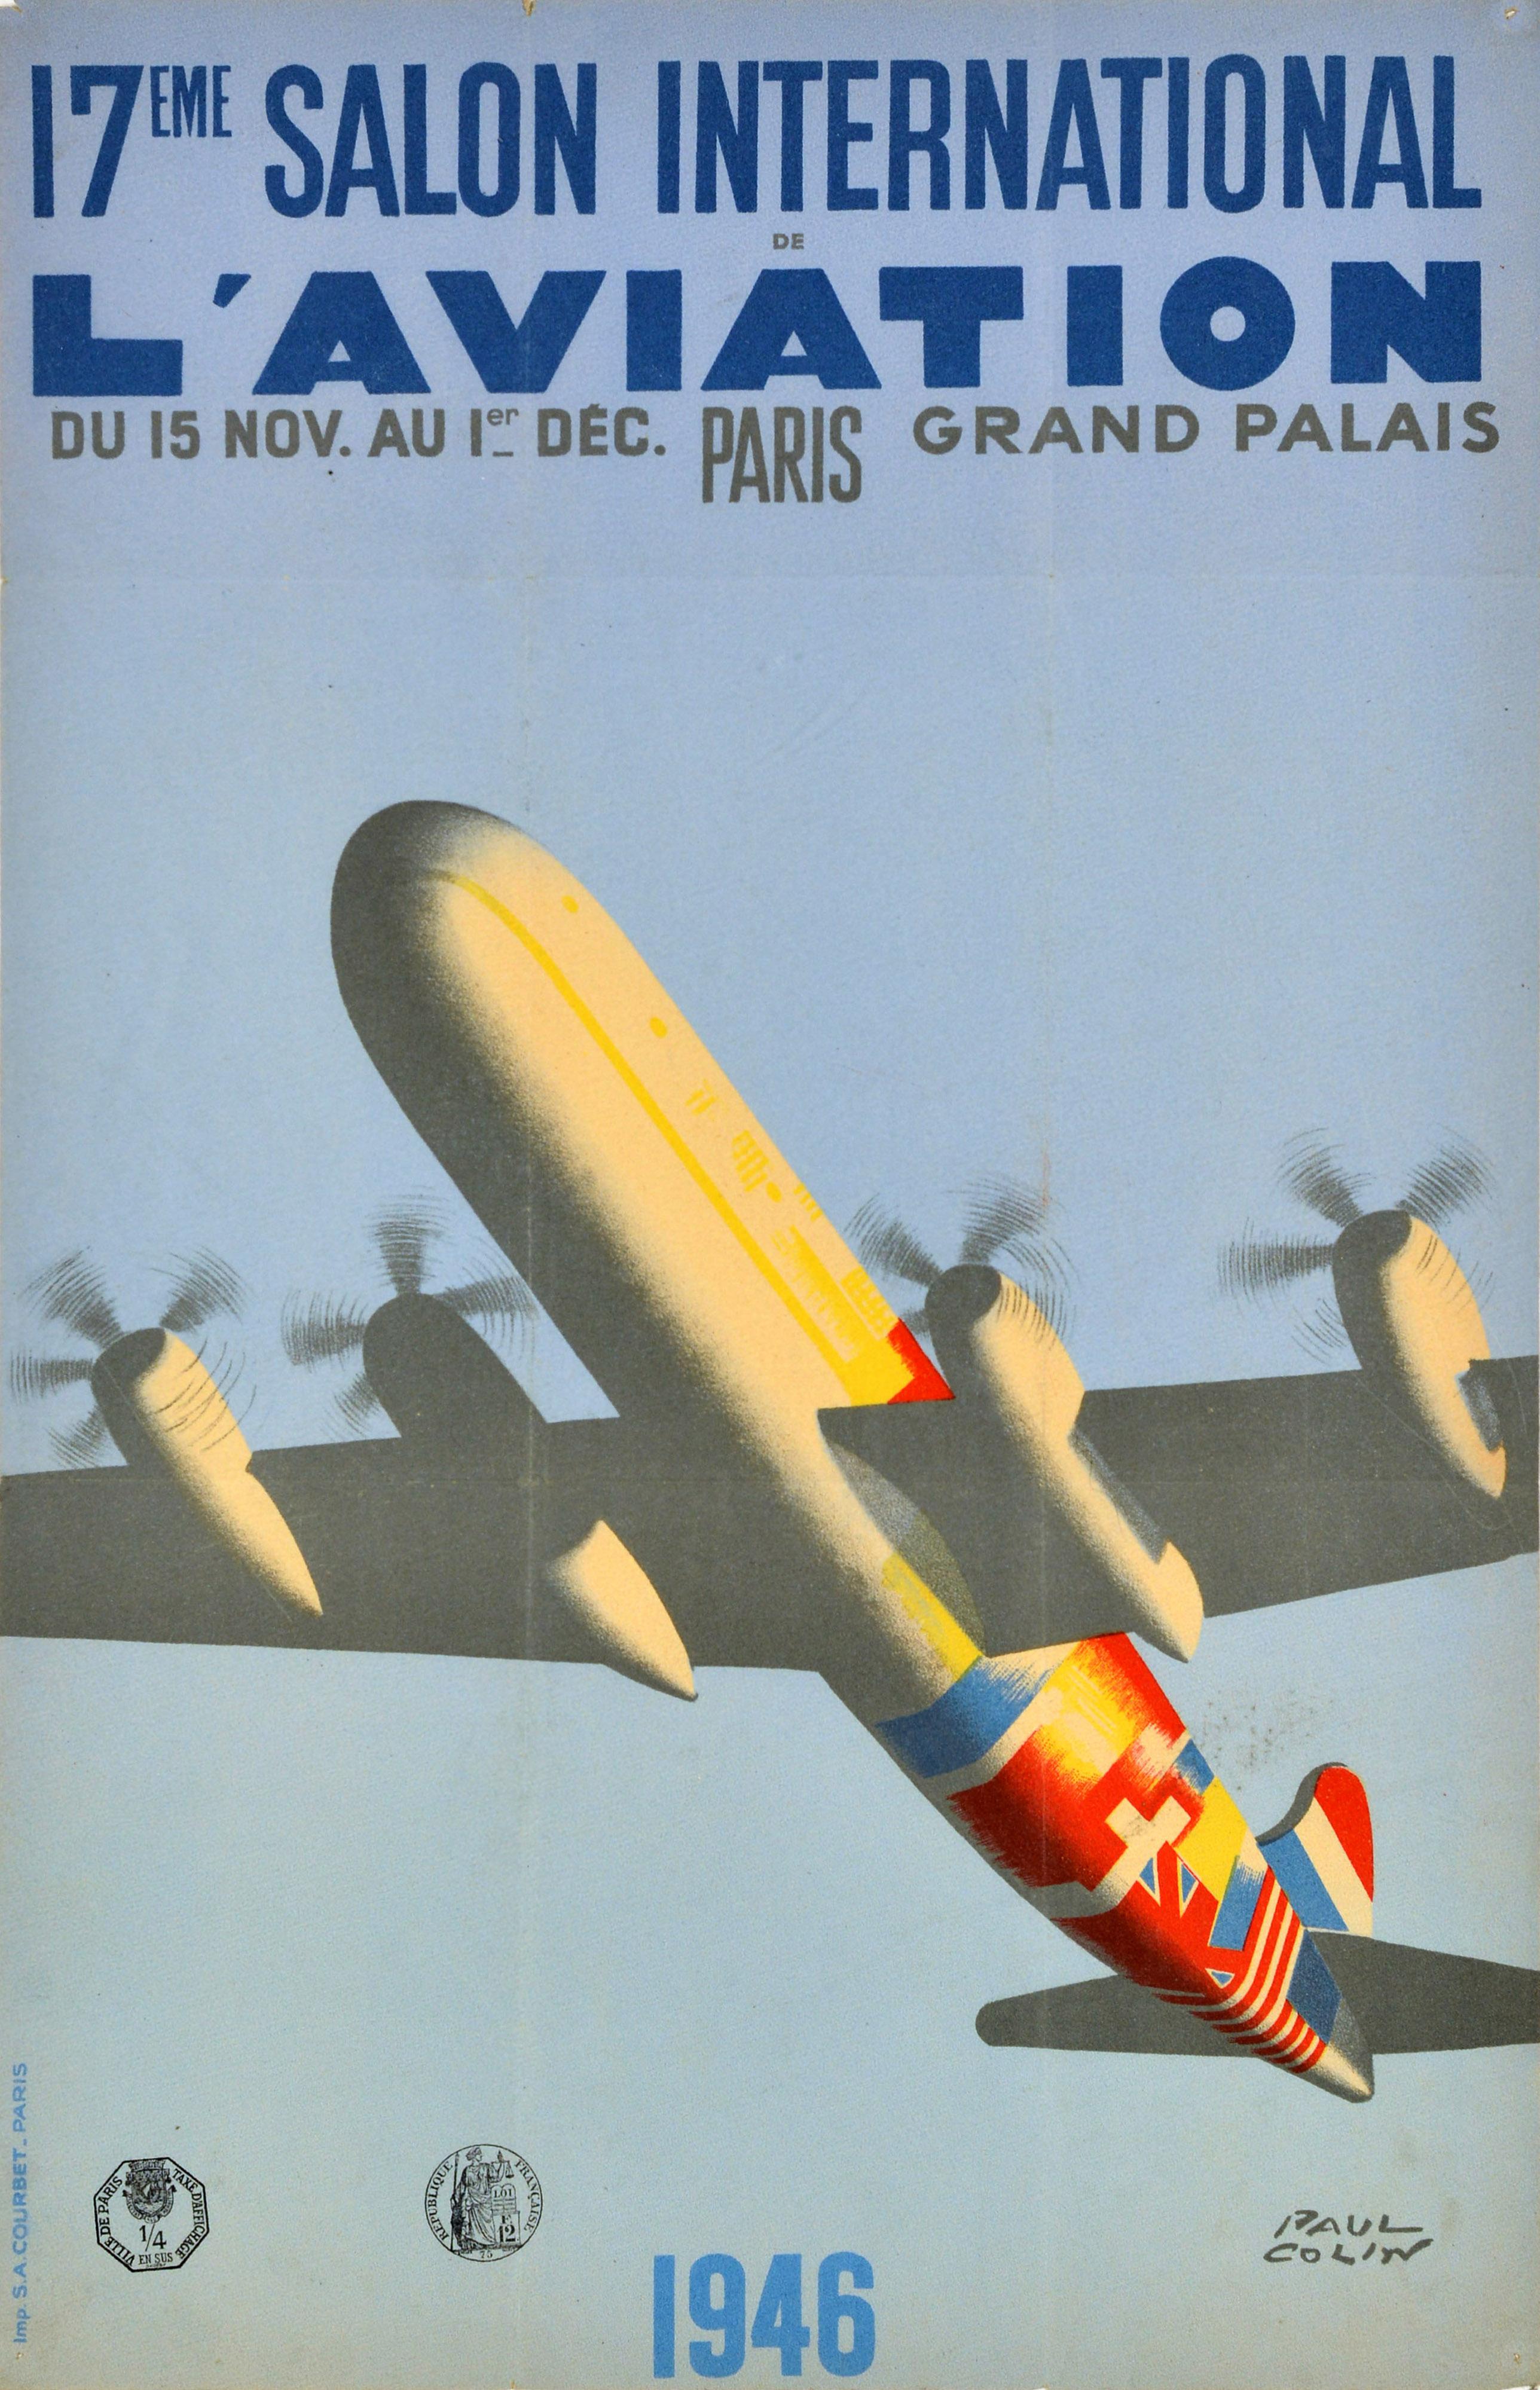 Original vintage post World War two poster for the 17th International Aviation Exhibition - 17eme Salon International l'Aviation - held from 15 November to 1 December at the Grand Palais Paris featuring a great illustration by Paul Colin (1892-1985)